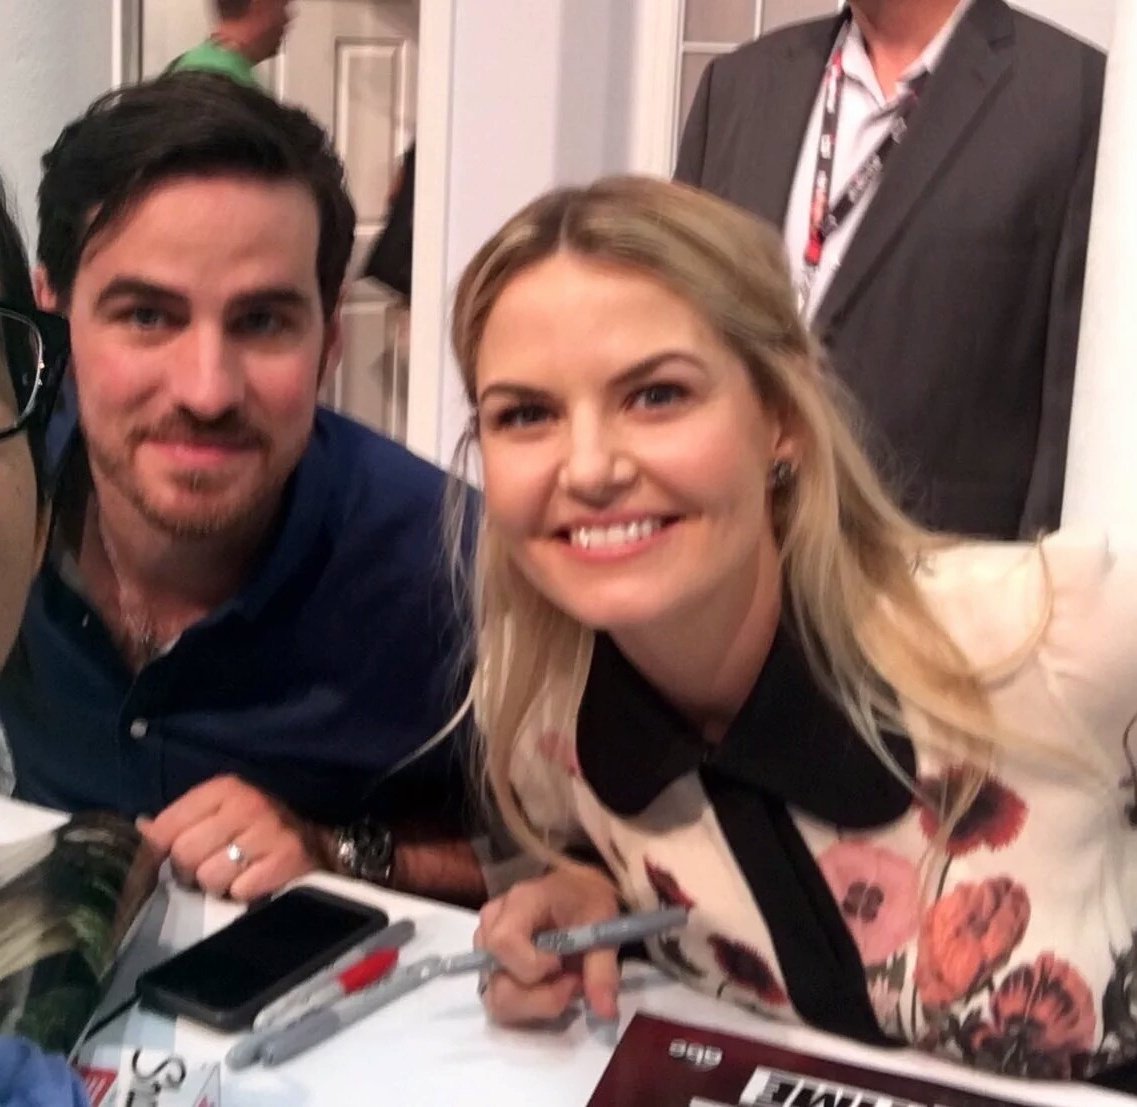 Because of Sdcc. Colin and Jen's moments on the comi con